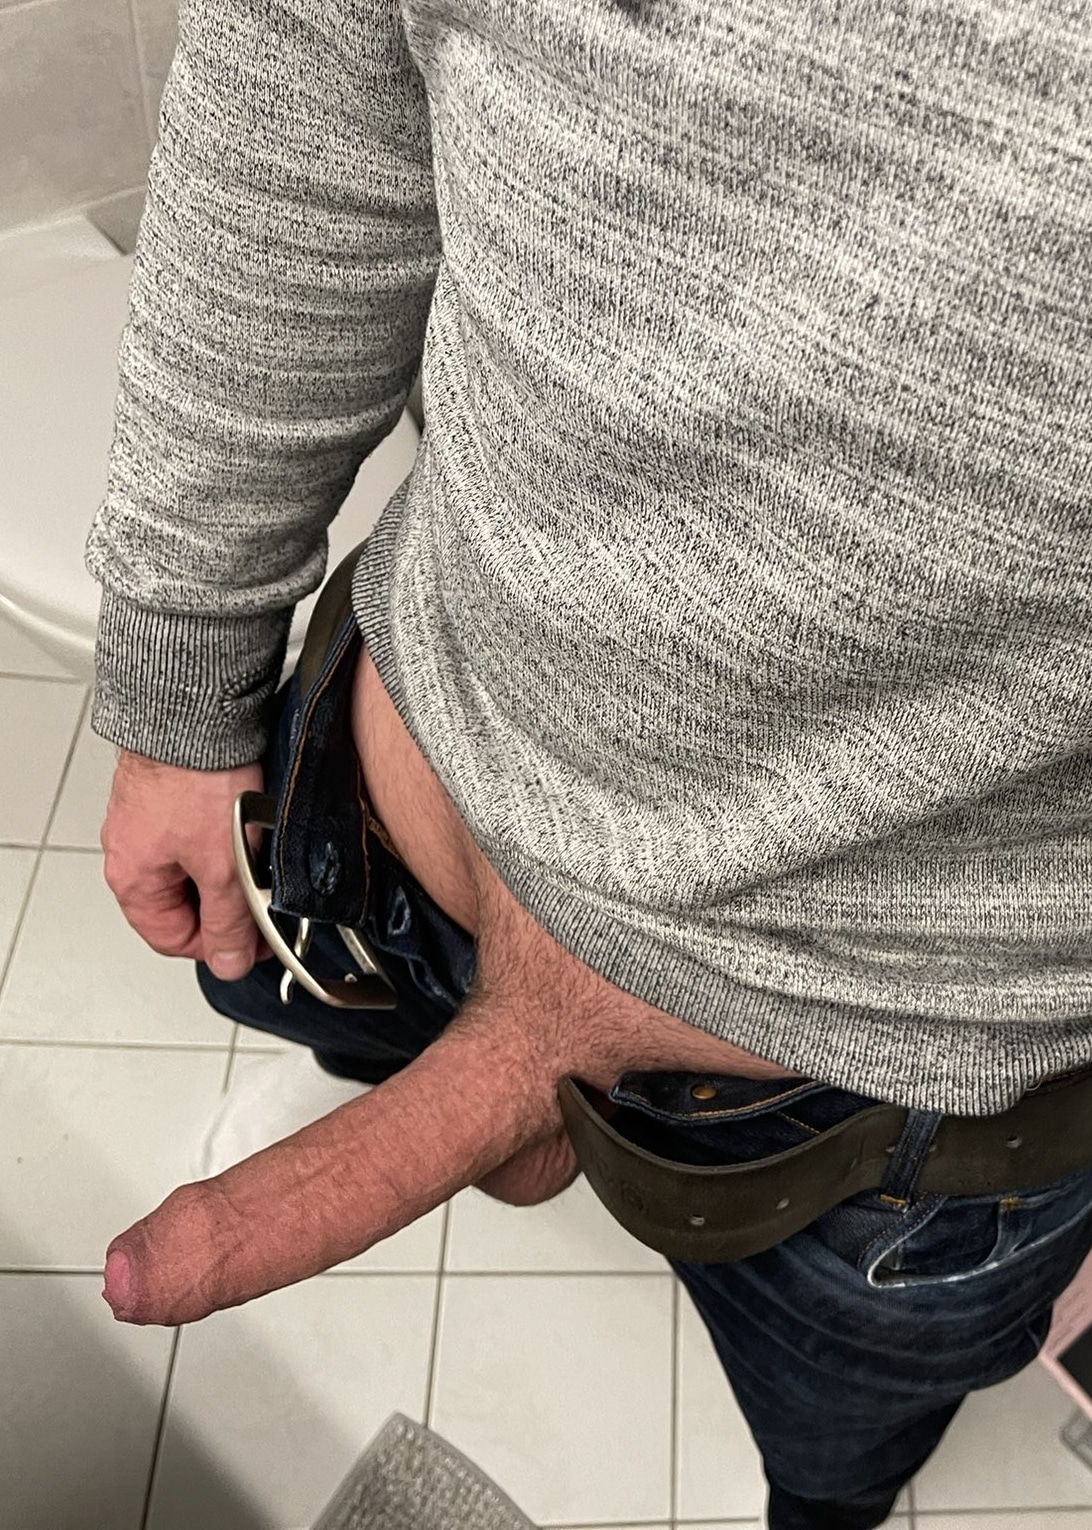 Clothed guy with his dick out